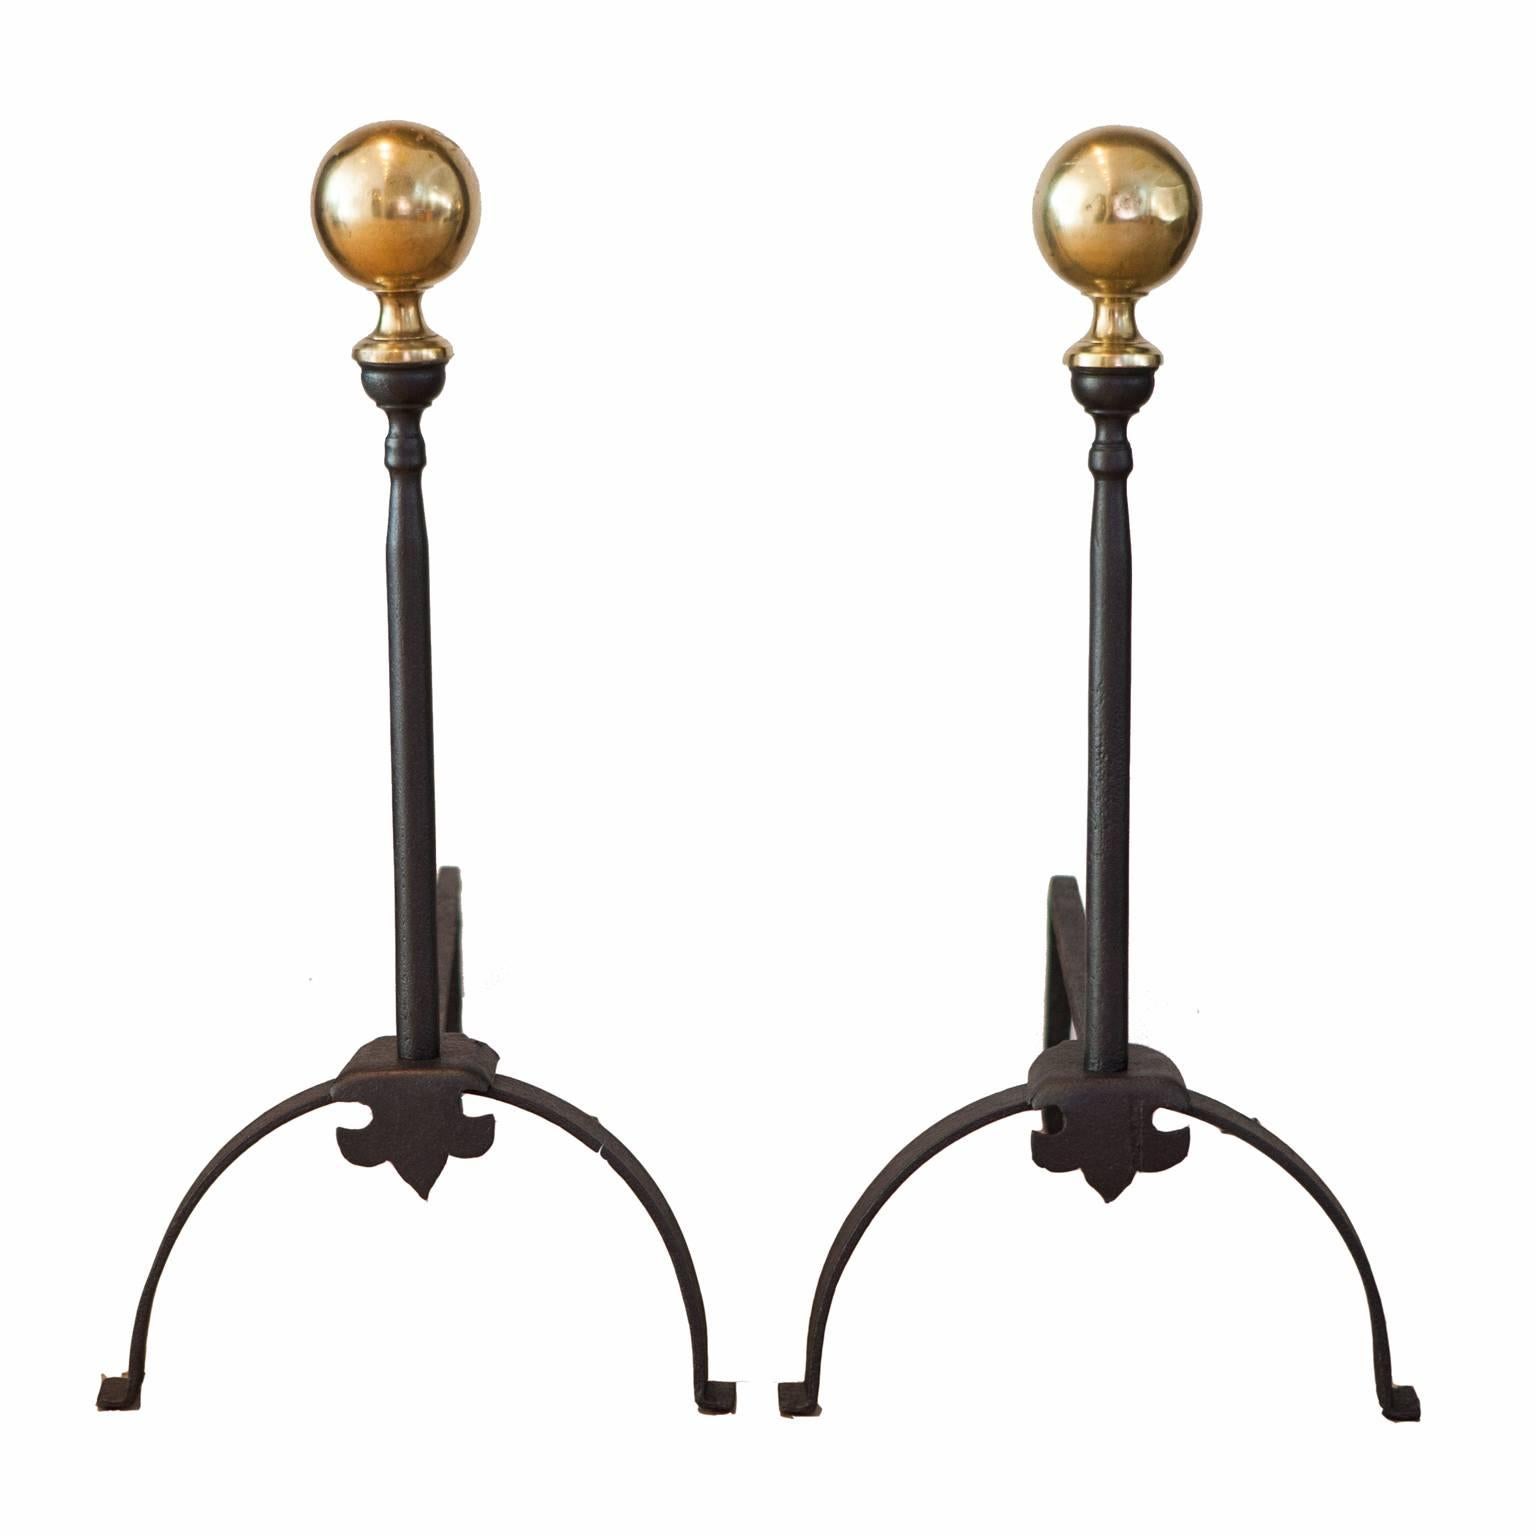 19th Century English Cast Iron and Brass Fire Dogs or Andirons